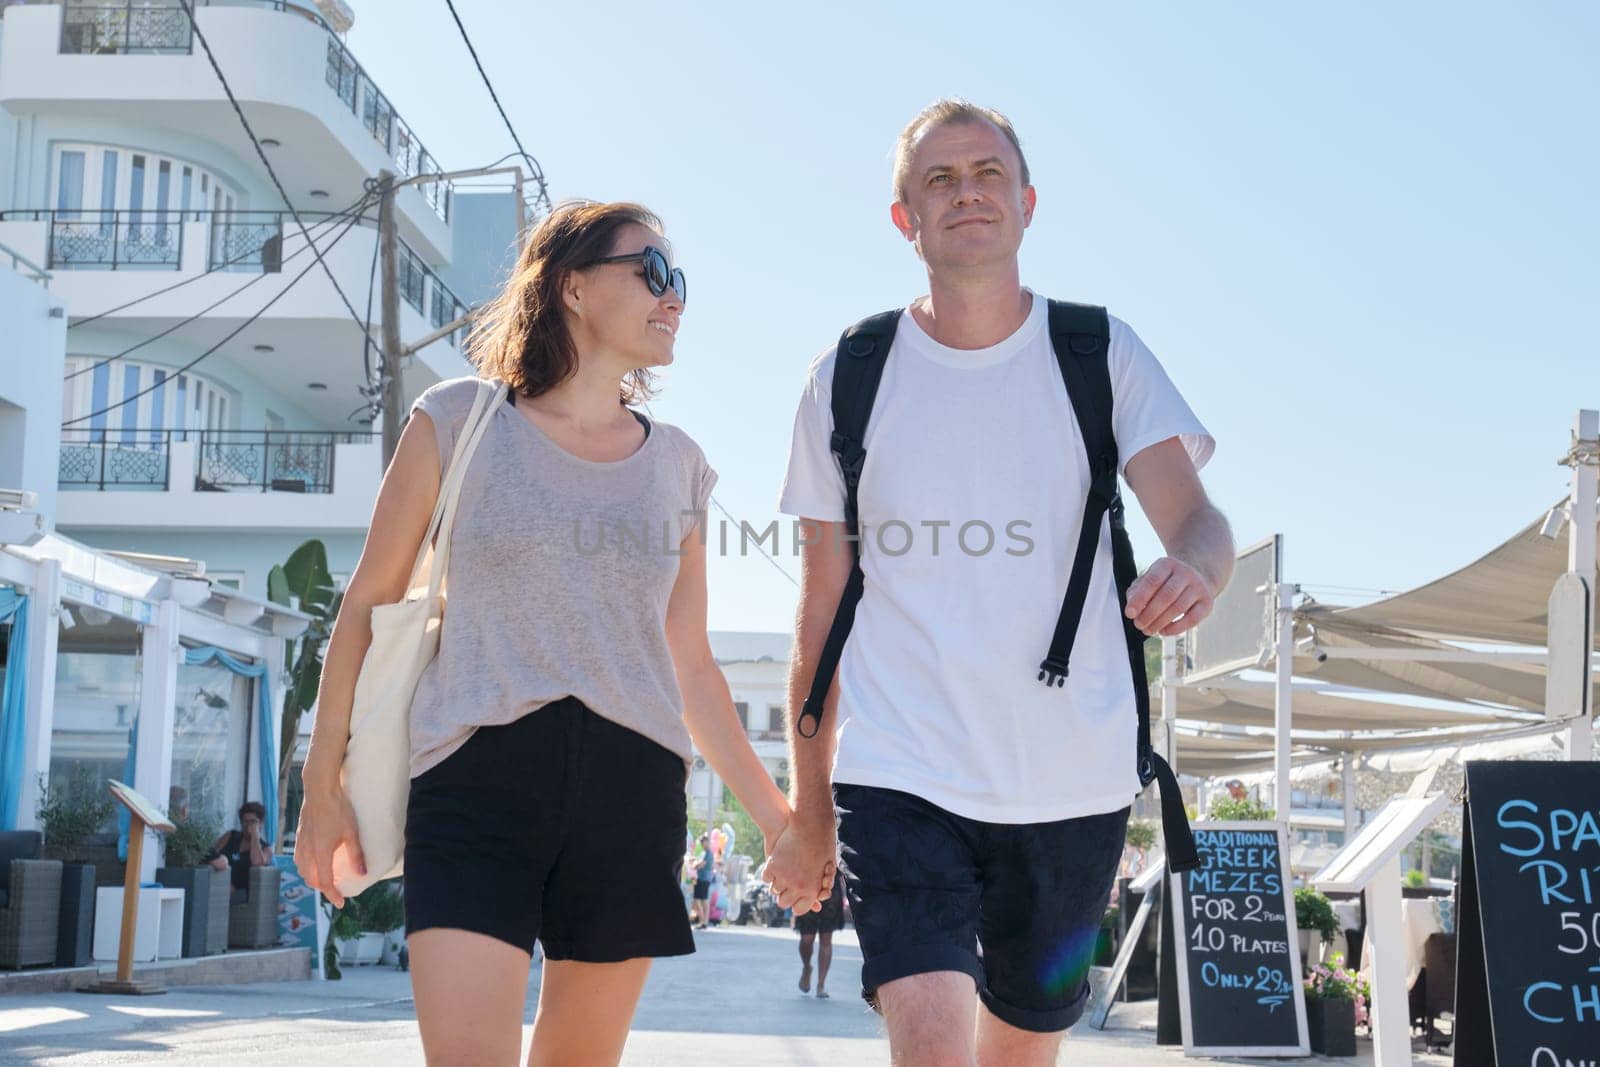 Mature happy couple walking around resort town holding hands. Communication, lifestyle, travel, outdoor activities for middle-aged people